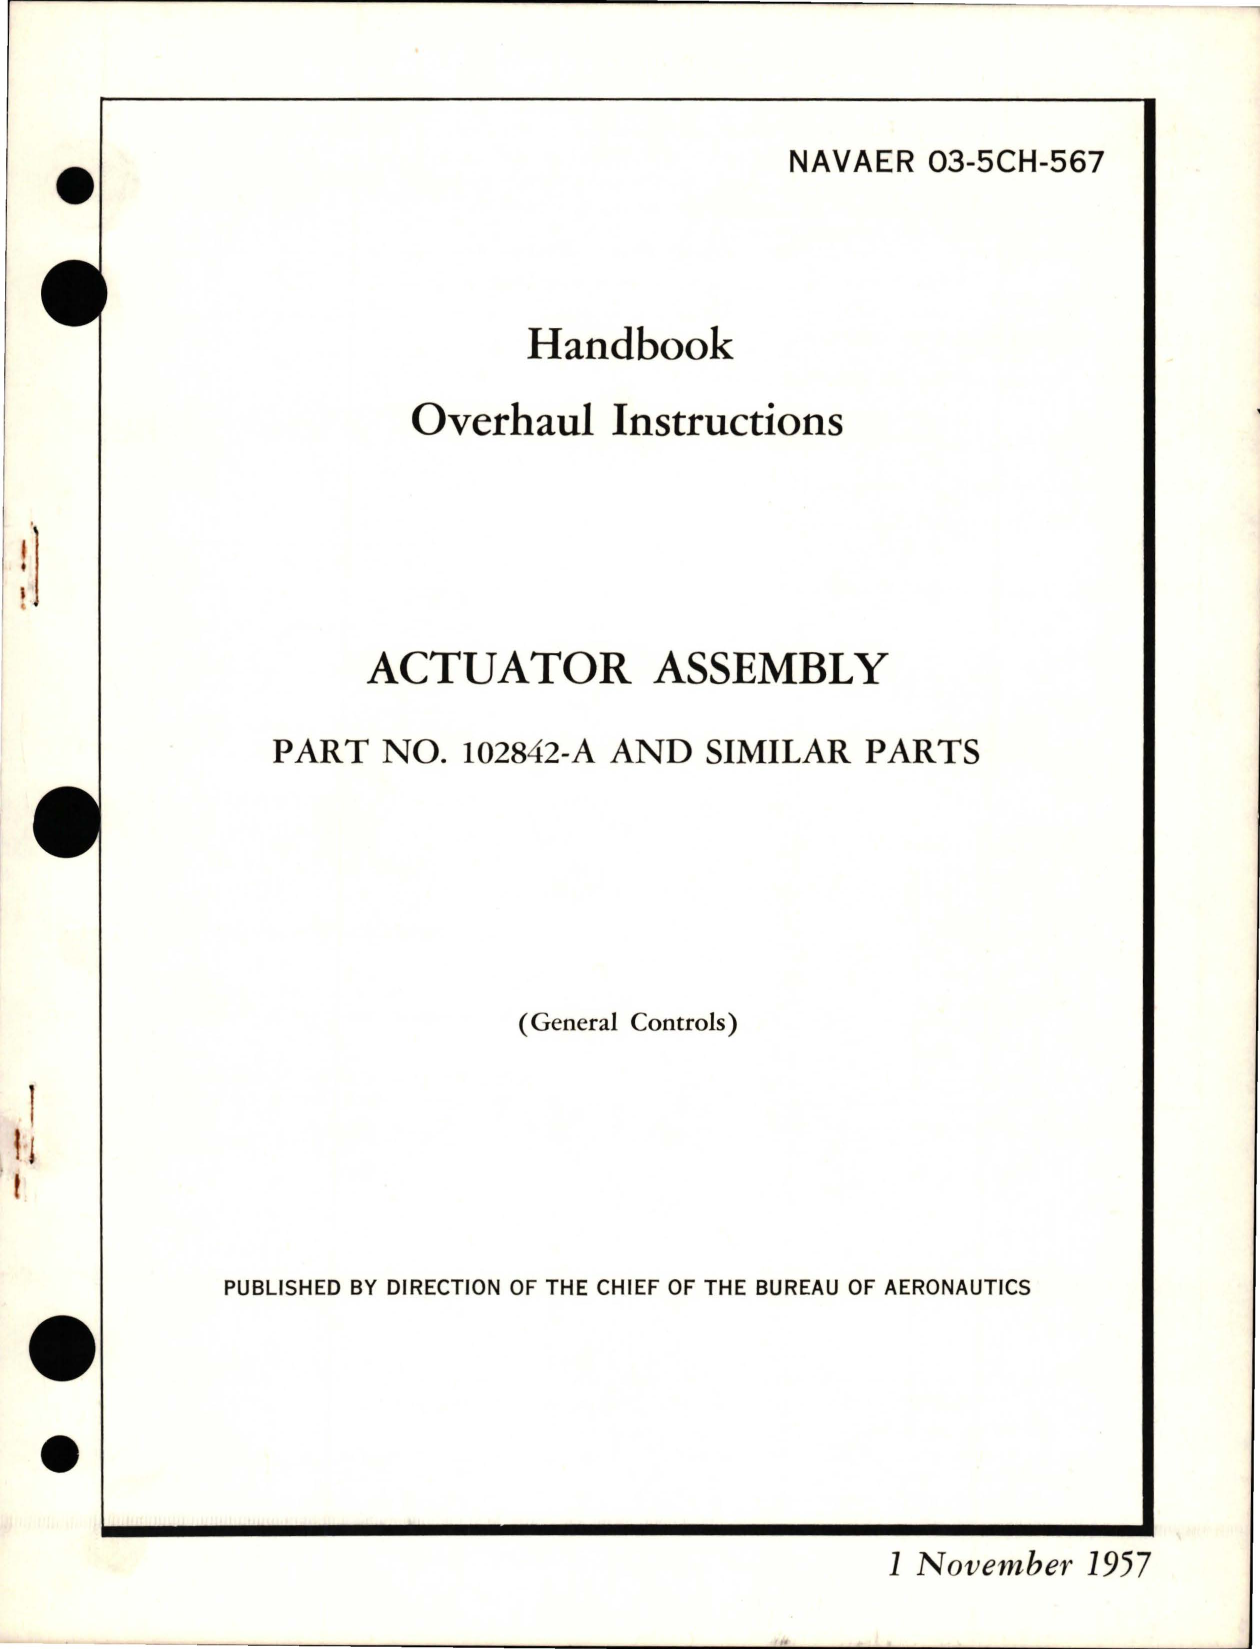 Sample page 1 from AirCorps Library document: Overhaul Instructions for Actuator Assembly - Part 102842-A and Similar Parts